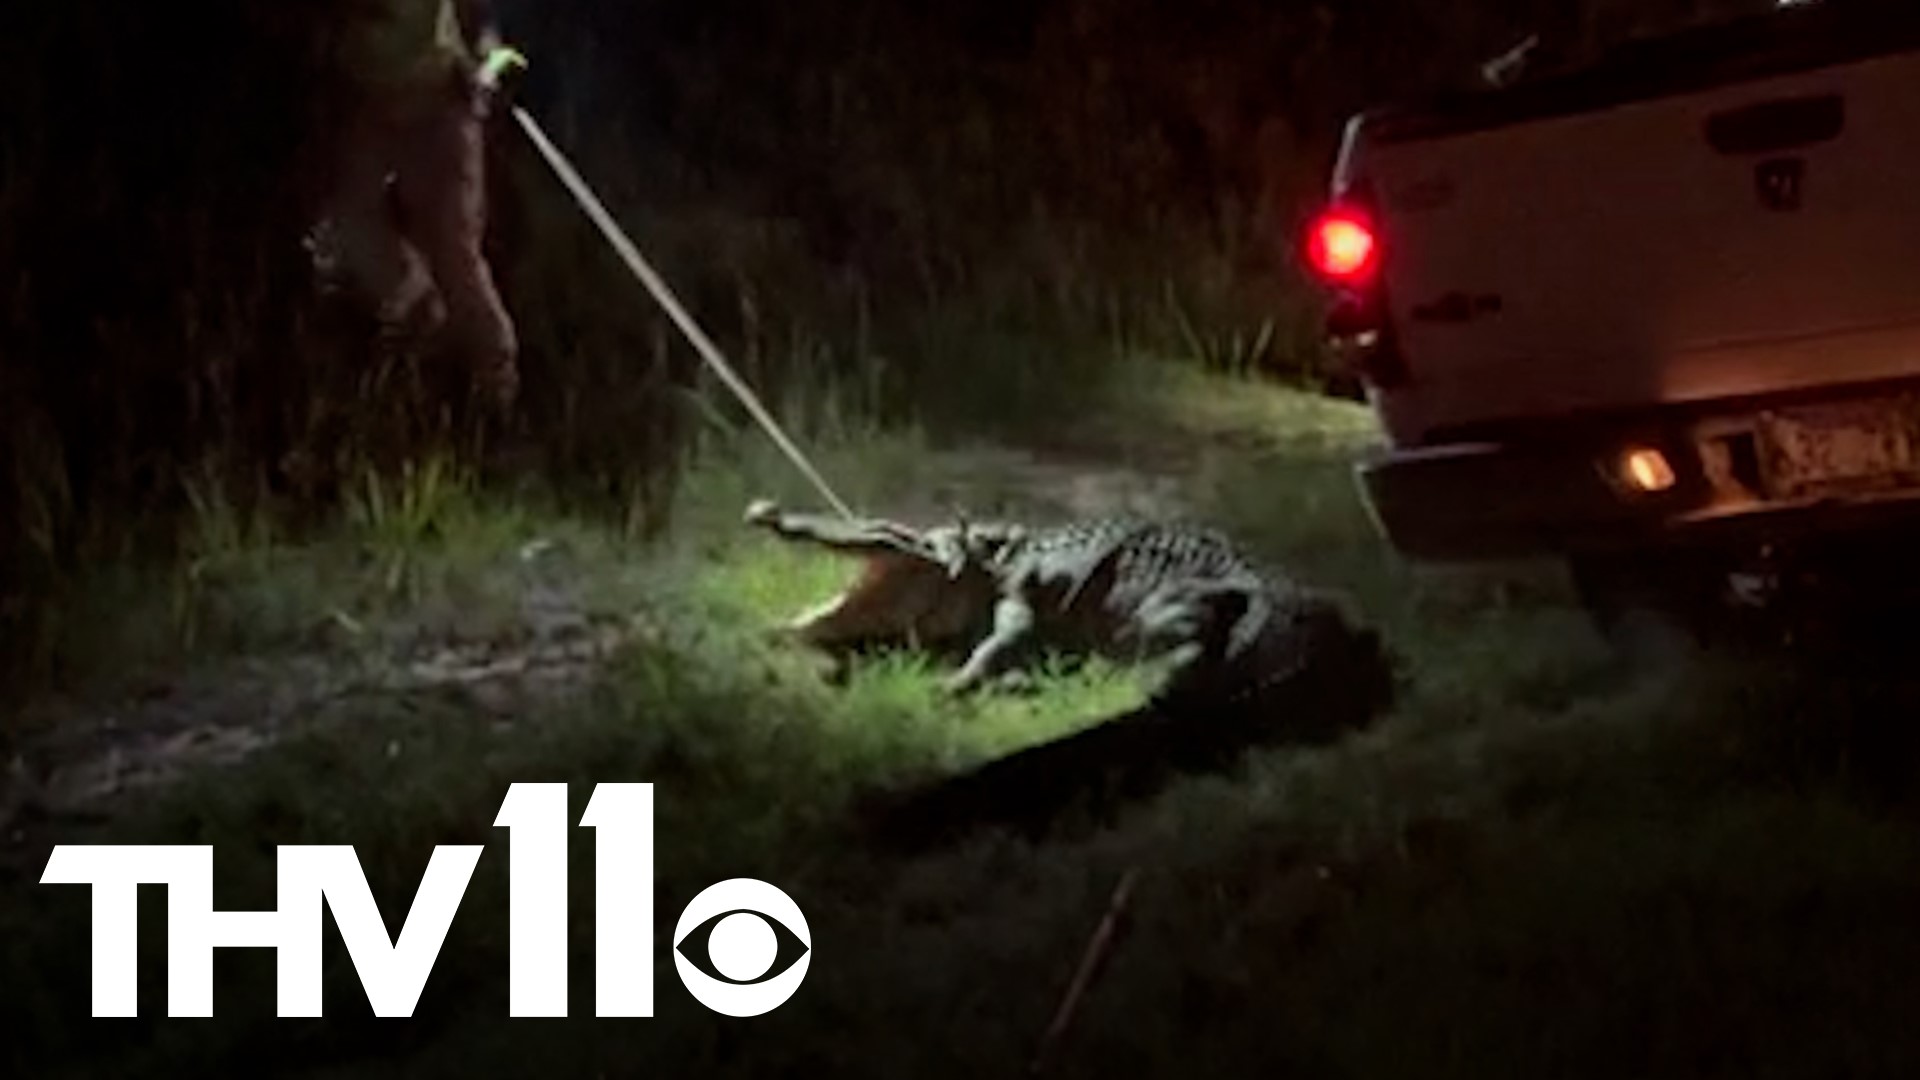 Officials captured an alligator in Monticello, Arkansas. Video credit: MonticelloLive